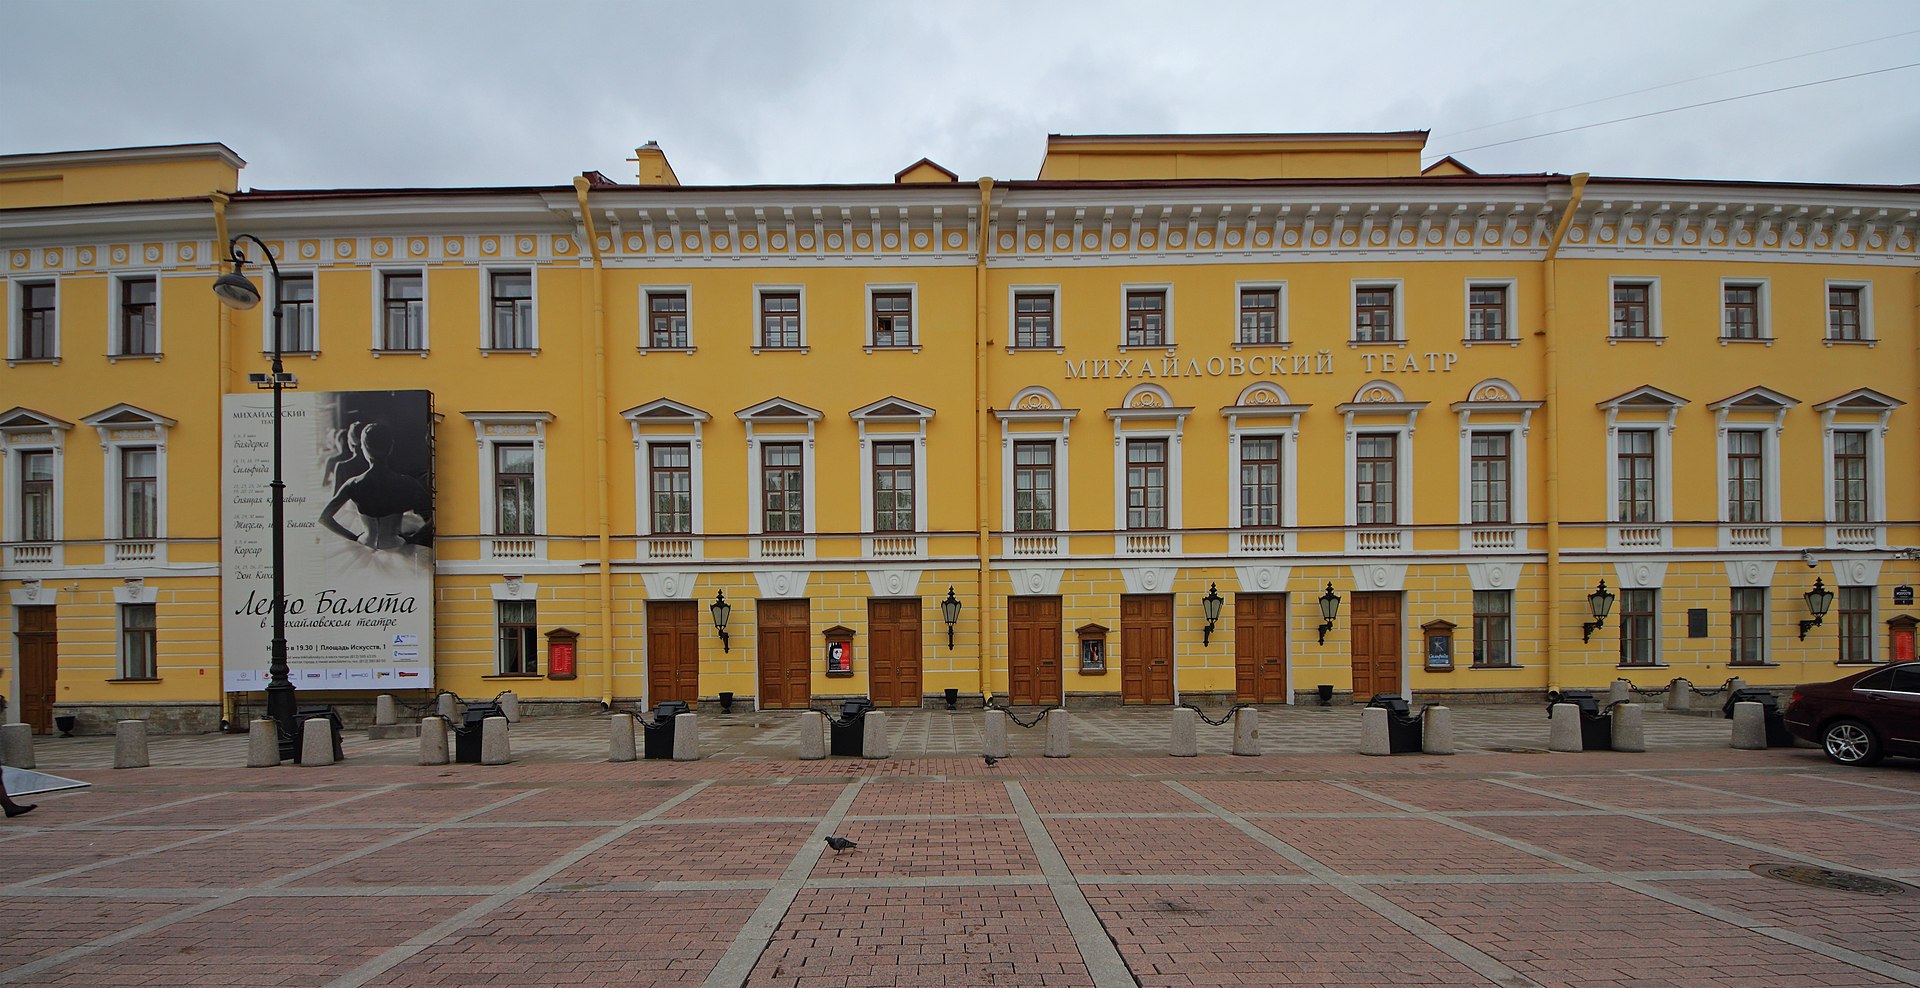 The Imperial Mikhailovsky Theatre in St Petersburg today. (Photo: A.Savin / WikiCommons)